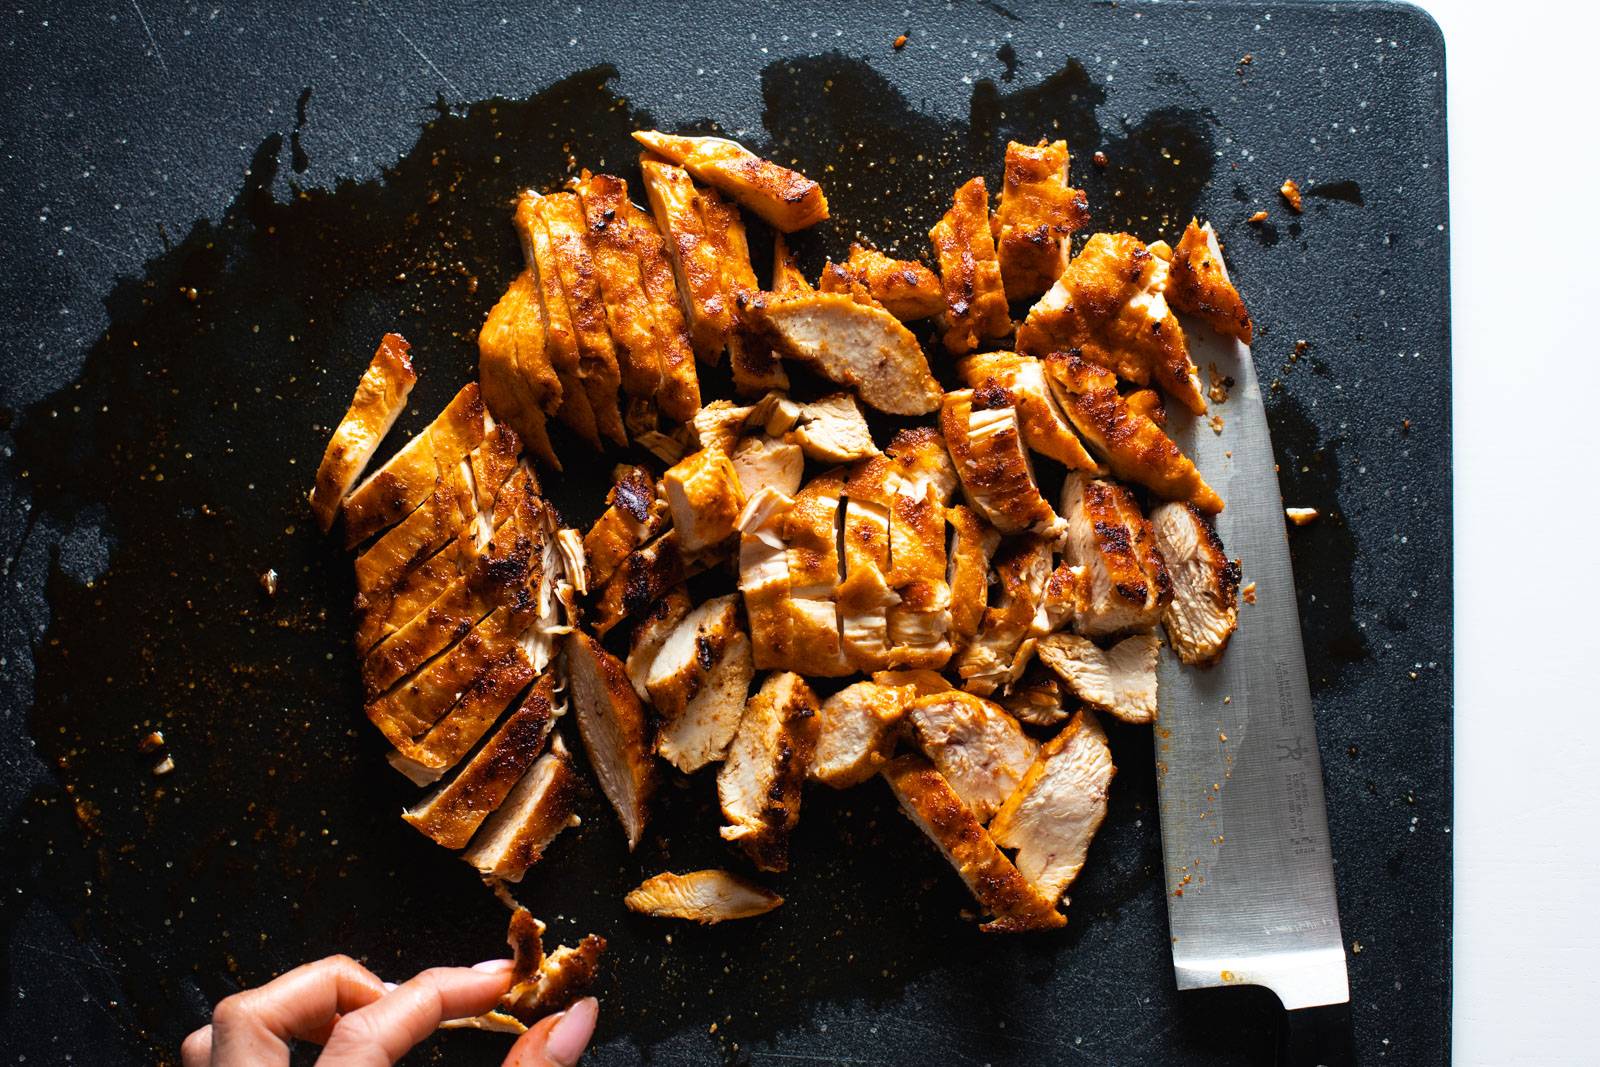 Grilled chicken chopped up on a cutting board